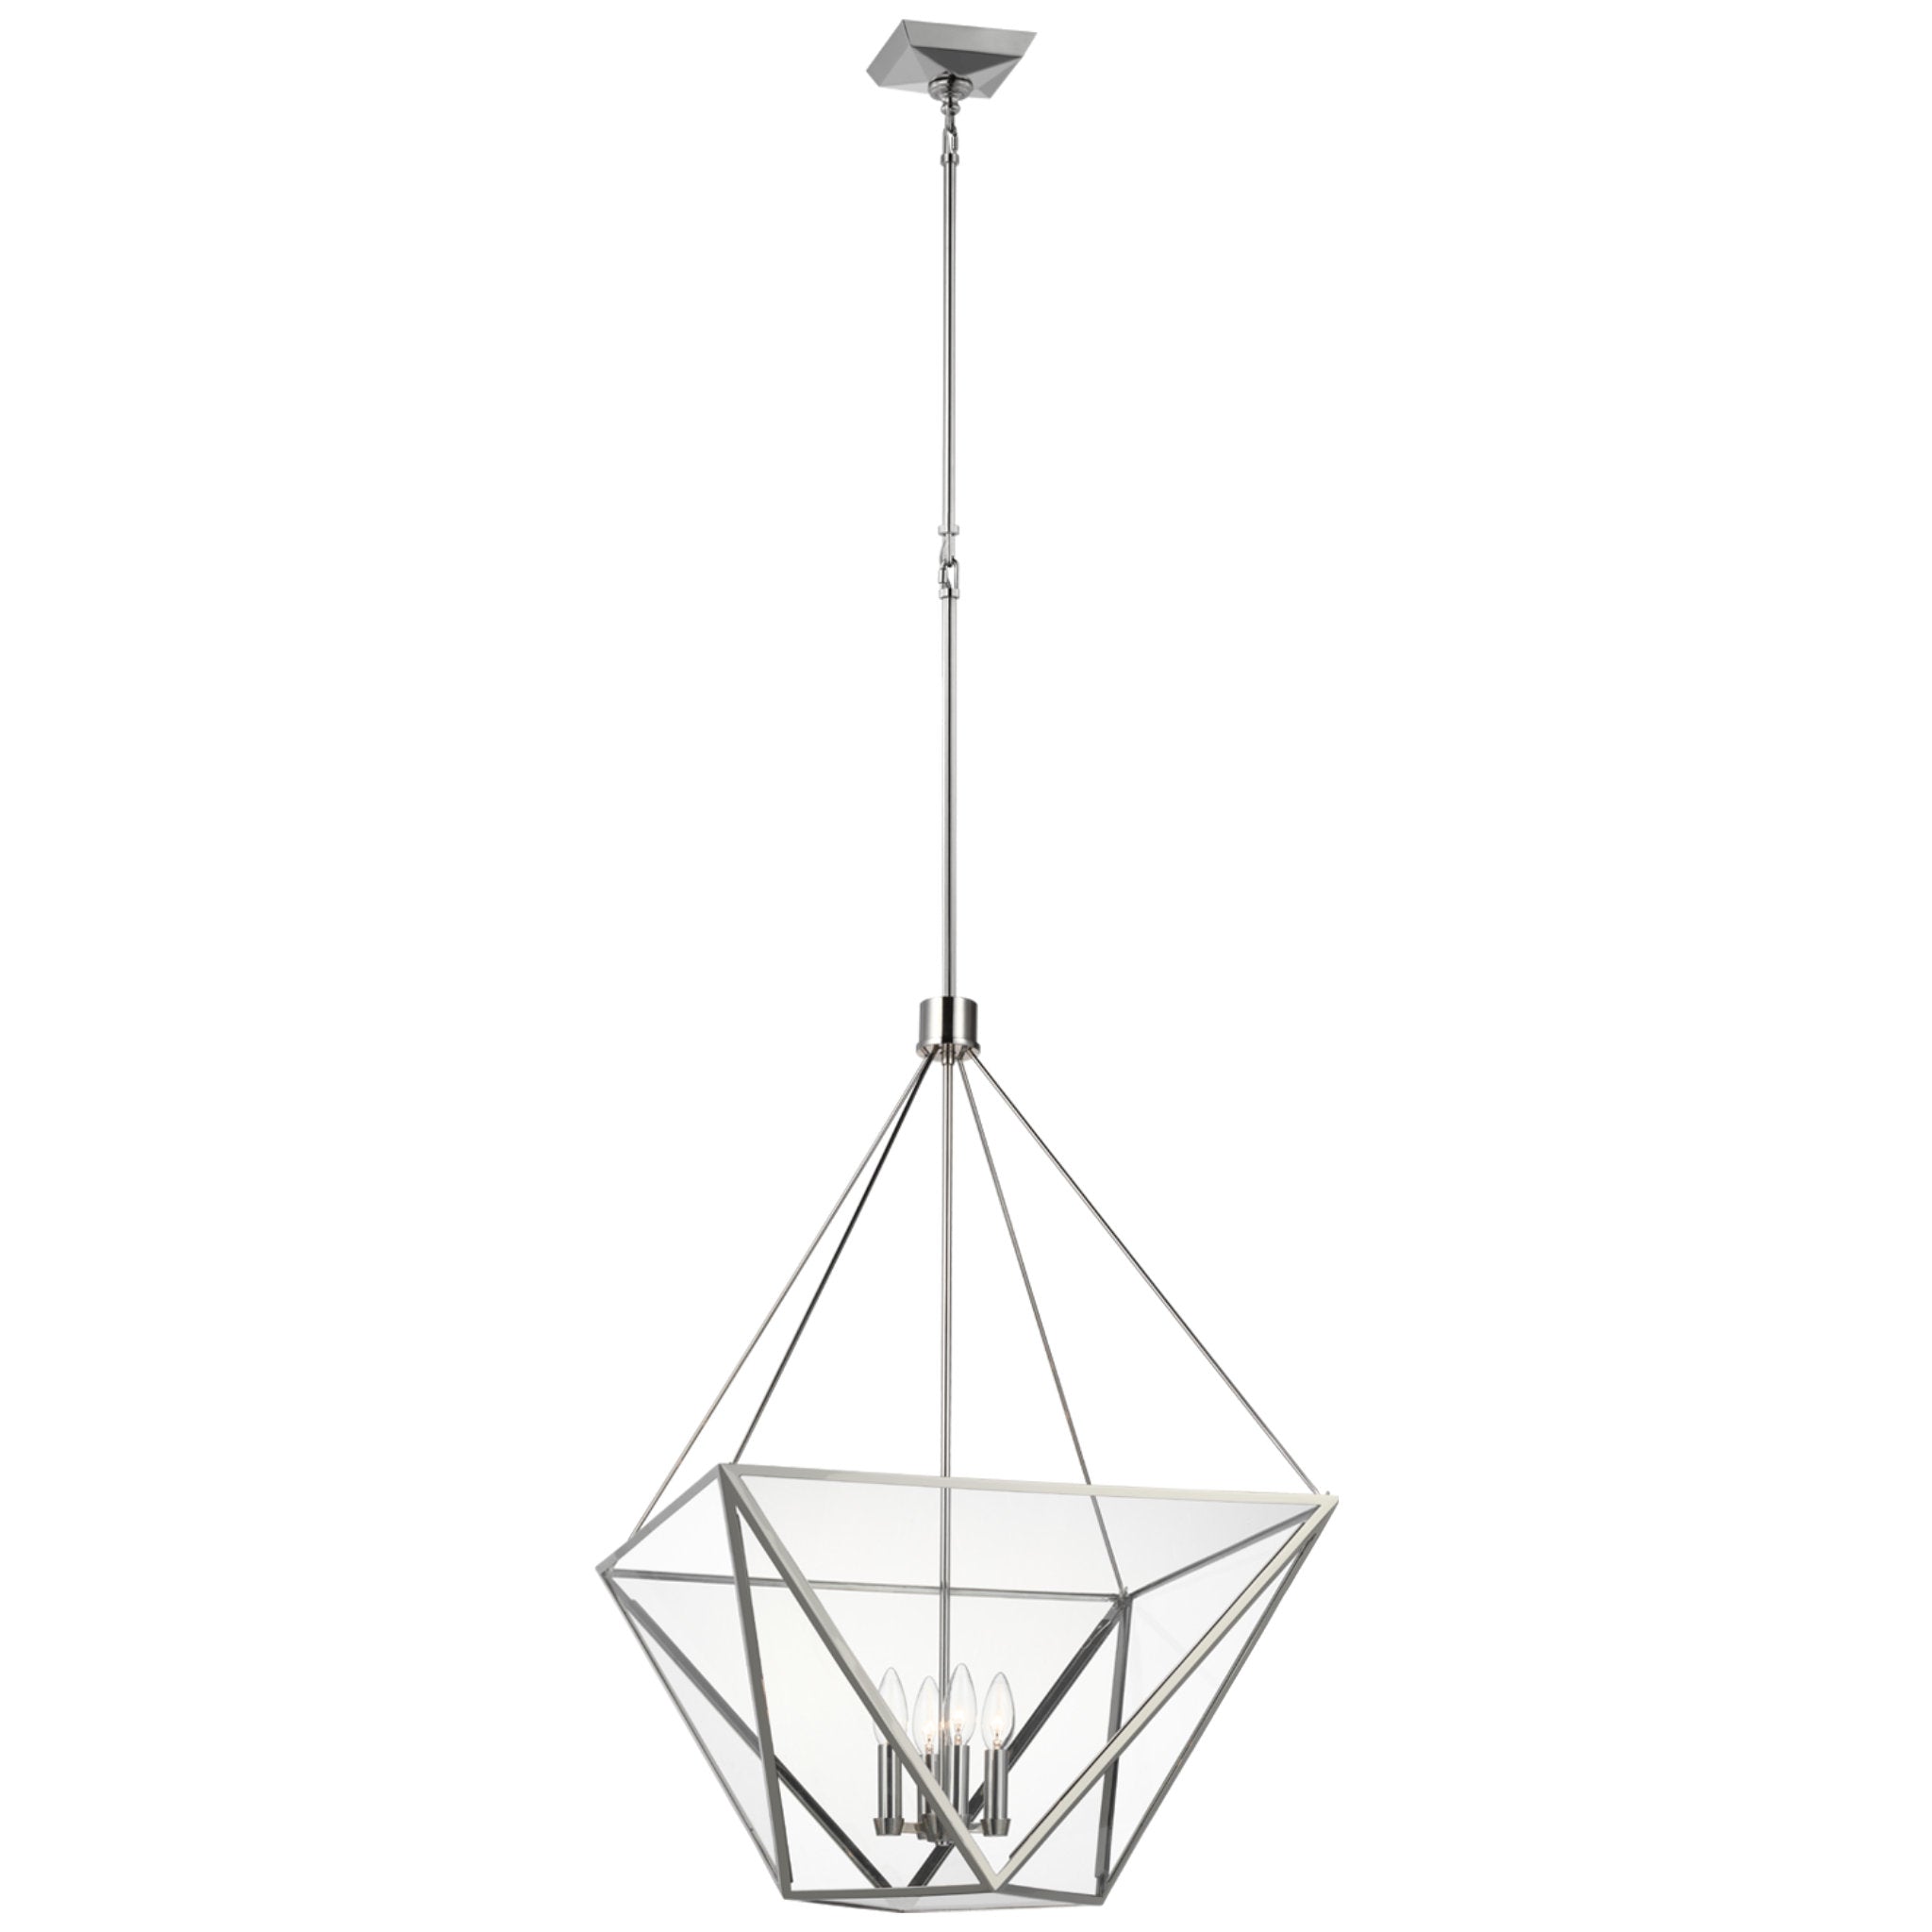 Julie Neill Lorino Large Lantern in Polished Nickel with Clear Glass